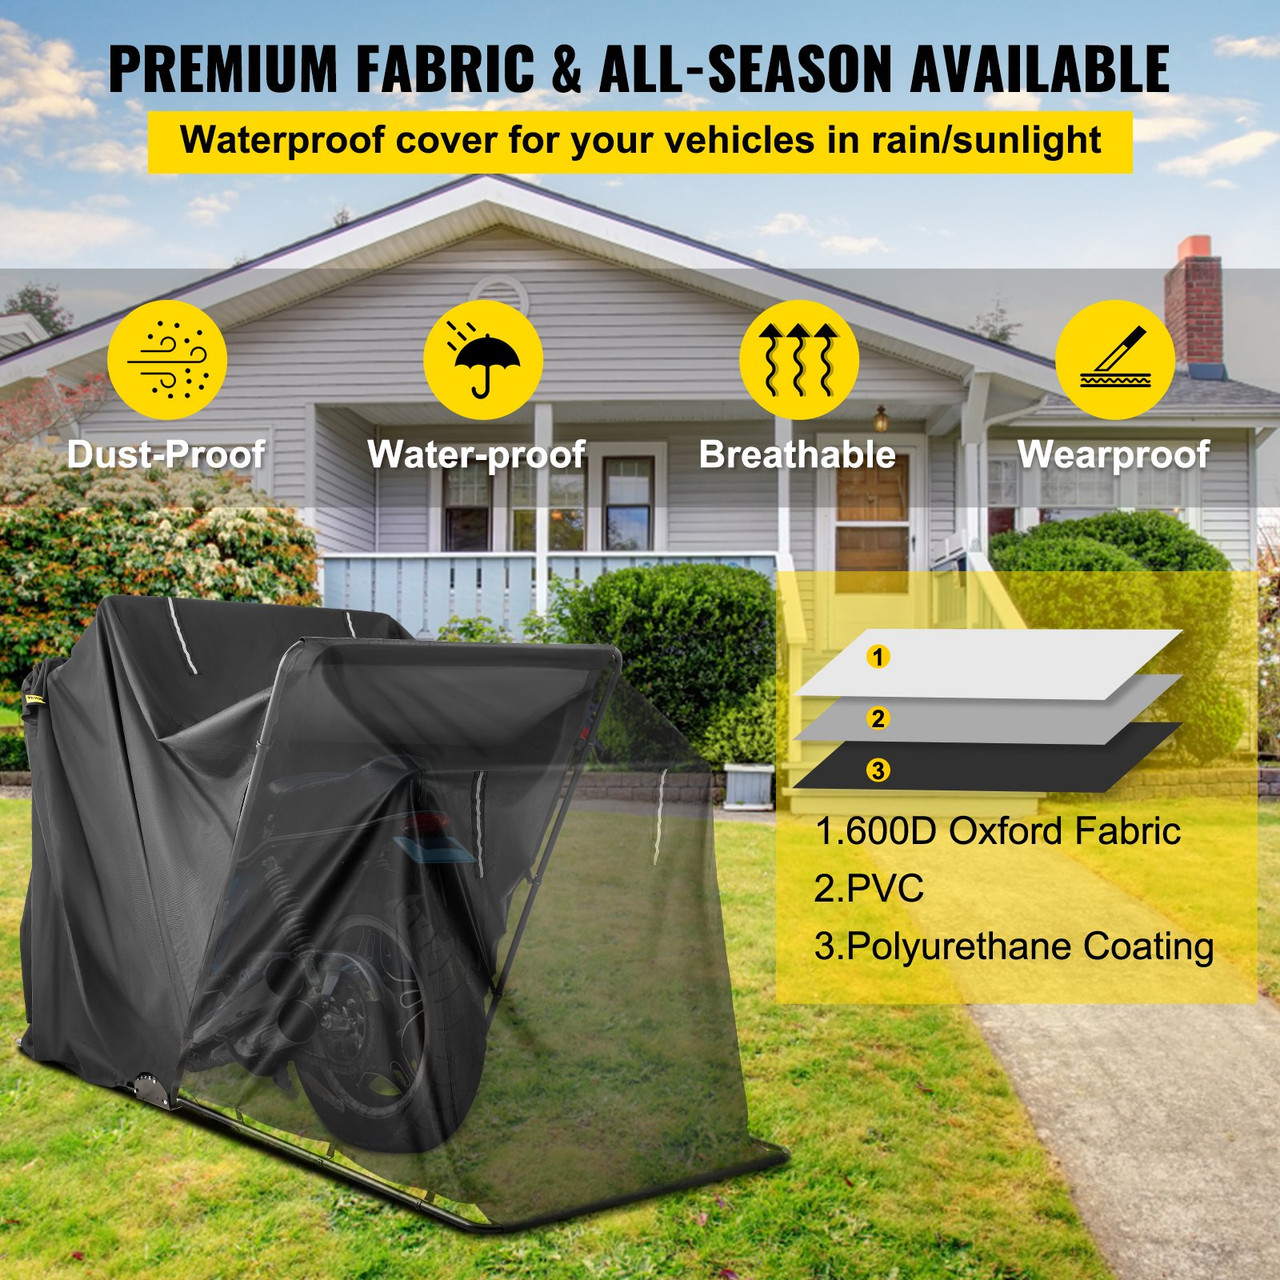 Motorcycle Shelter, Waterproof Motorcycle Cover, Heavy Duty Motorcycle Shelter Shed, 600D Oxford Motorbike Shed Anti-UV, 106.3"x41.3"x61" Black Shelter Storage Garage Tent w/ Lock & Weight Bag